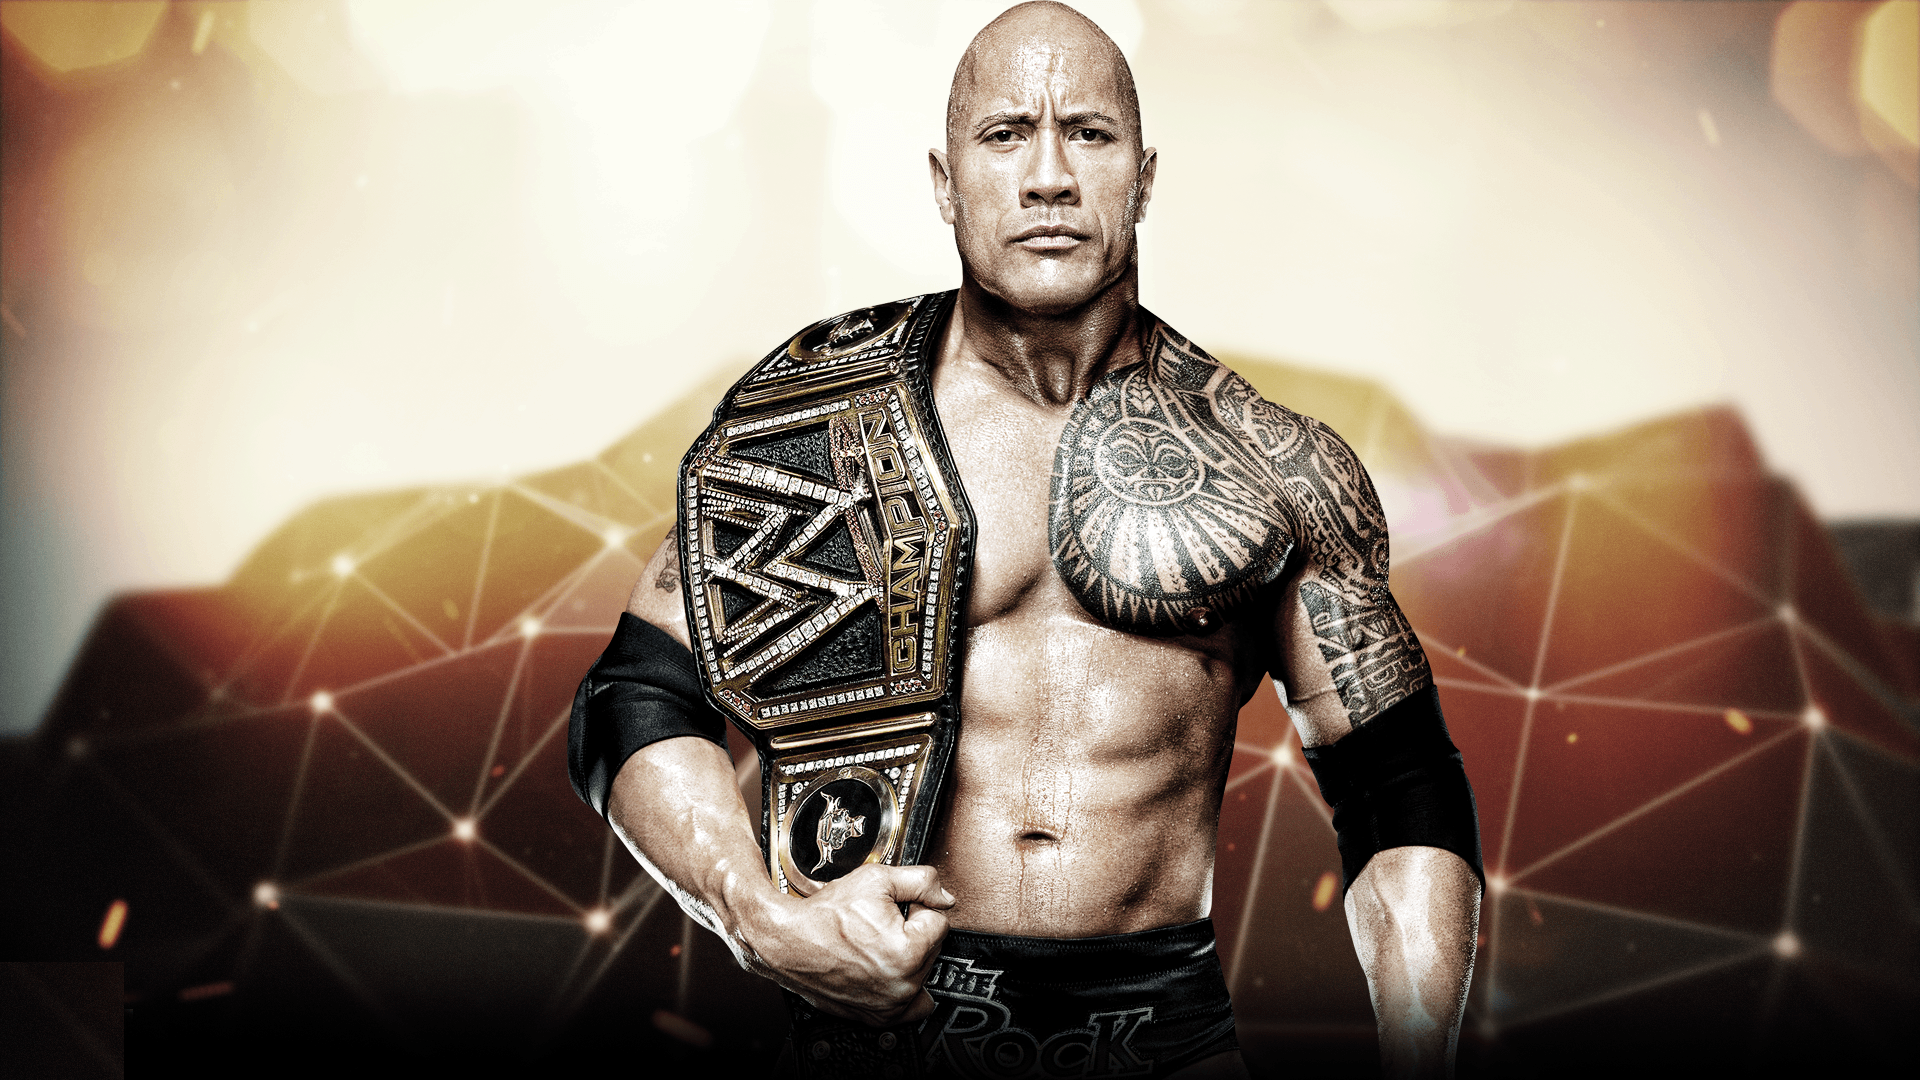 The Rock Wallpapers Wallpaper Cave